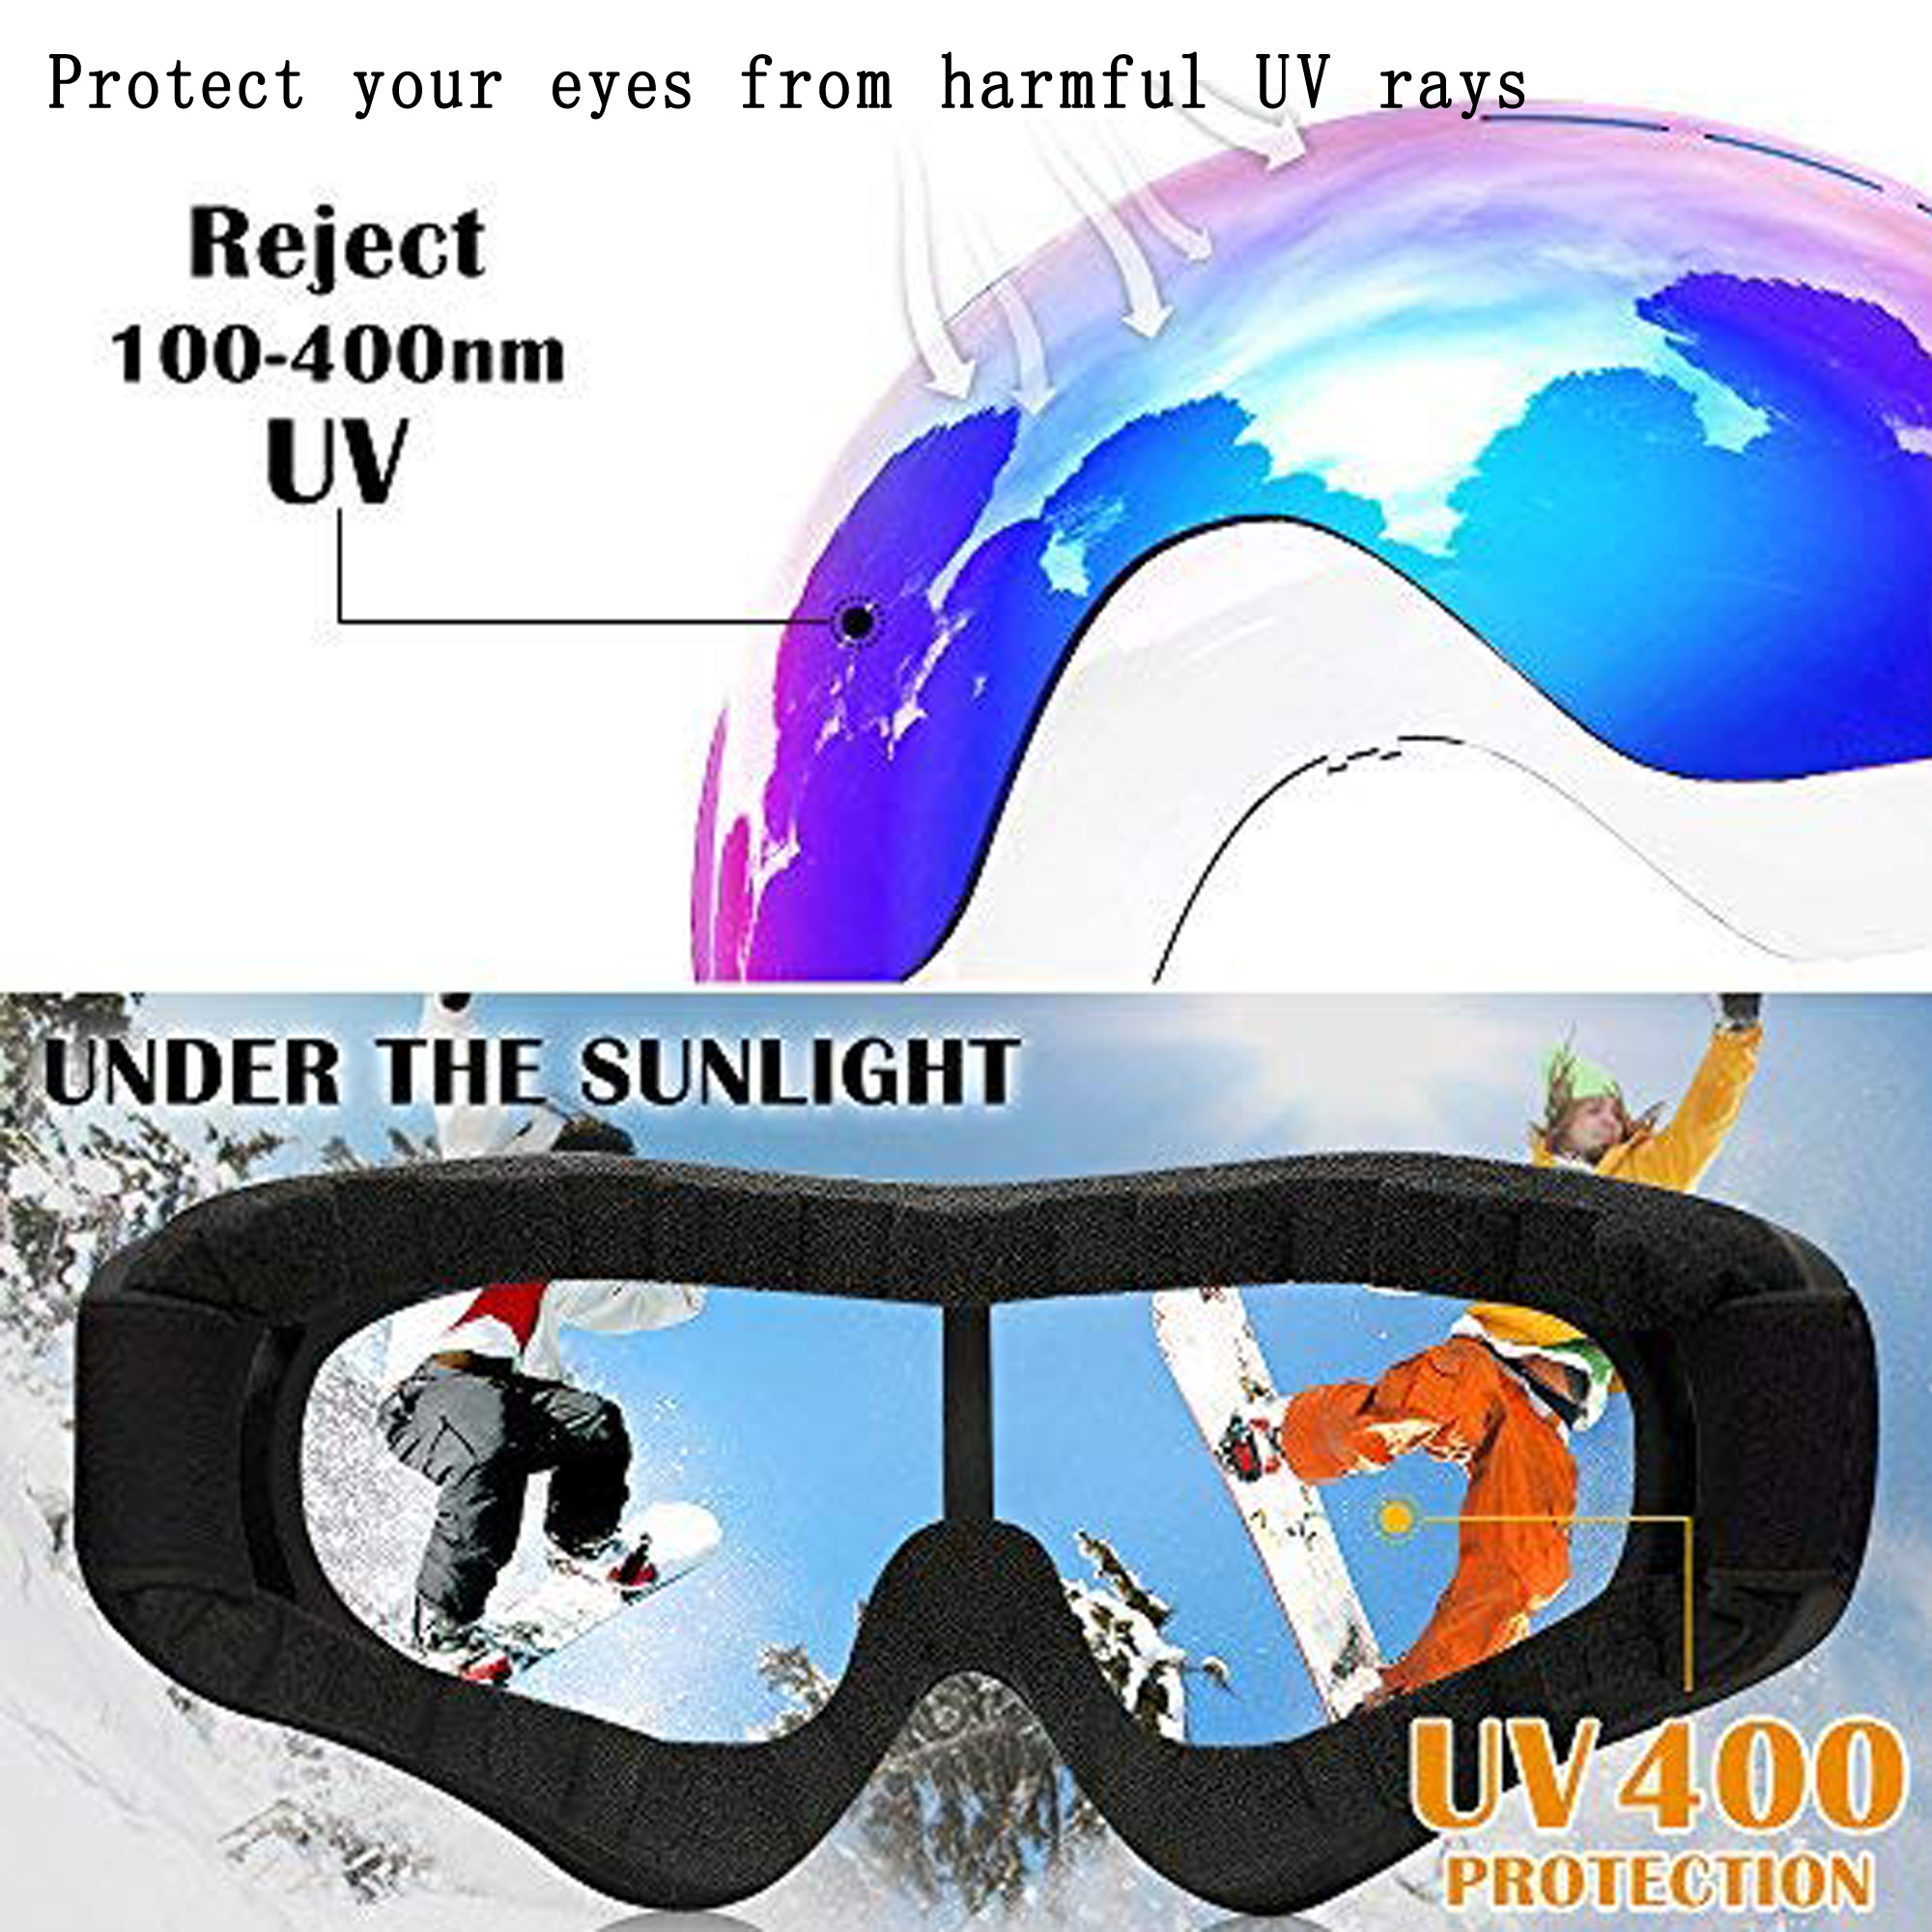 LELINTA Ski Snowboard Goggles UV Protection Anti-Fog Snow Goggles Winter Outdoor Sports Skiing Snowboard Goggles for Men Women Youth - image 5 of 7